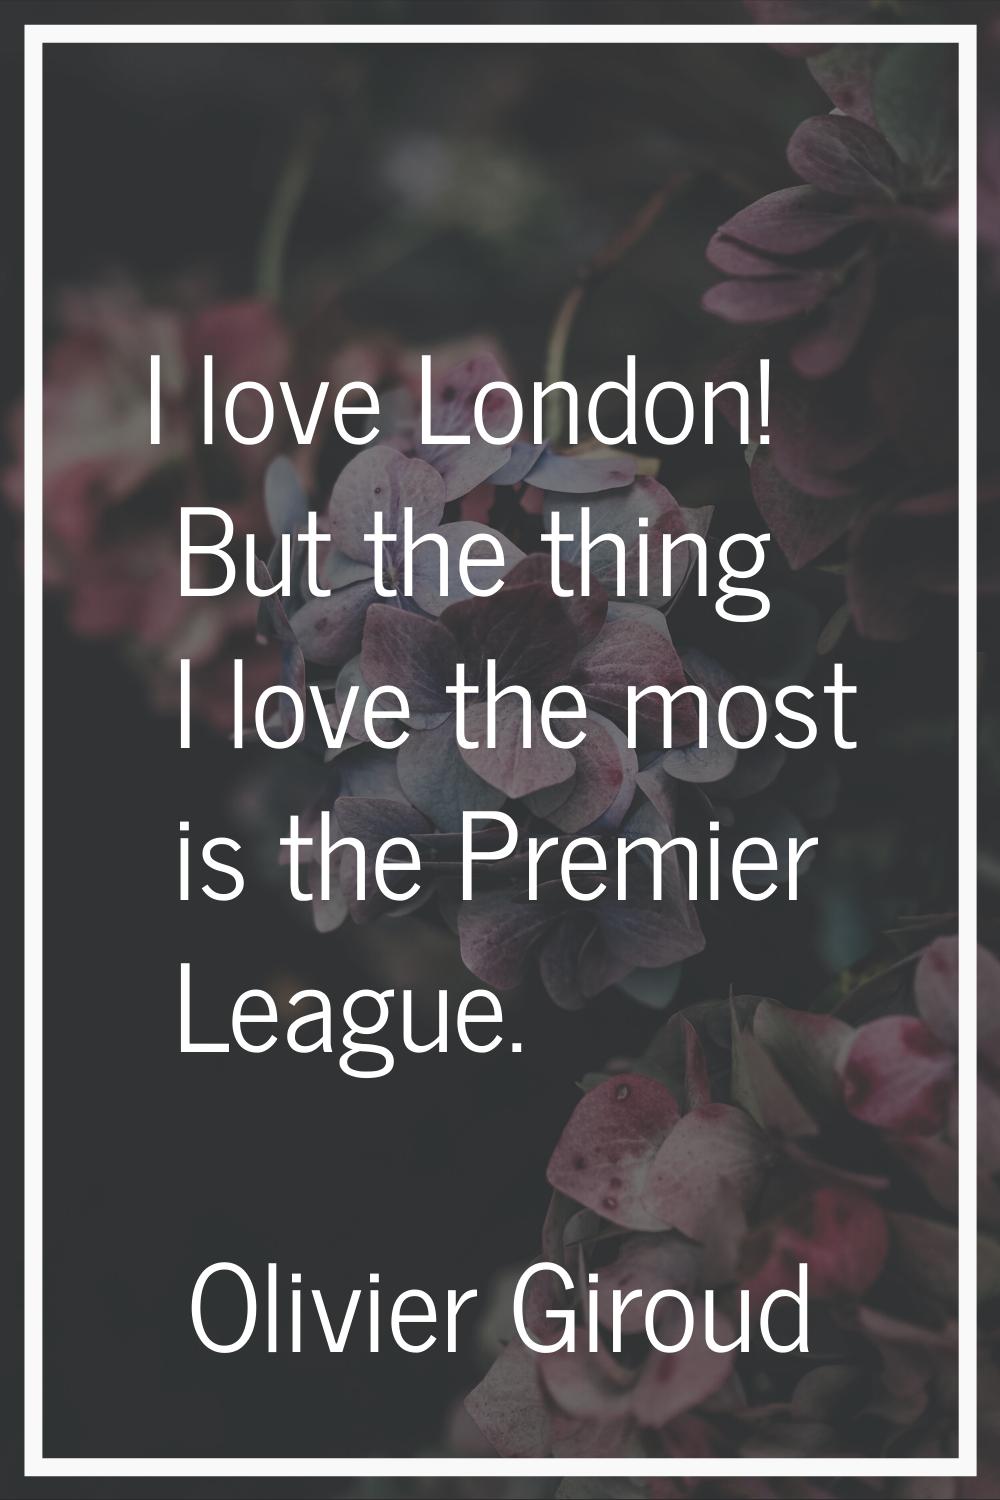 I love London! But the thing I love the most is the Premier League.